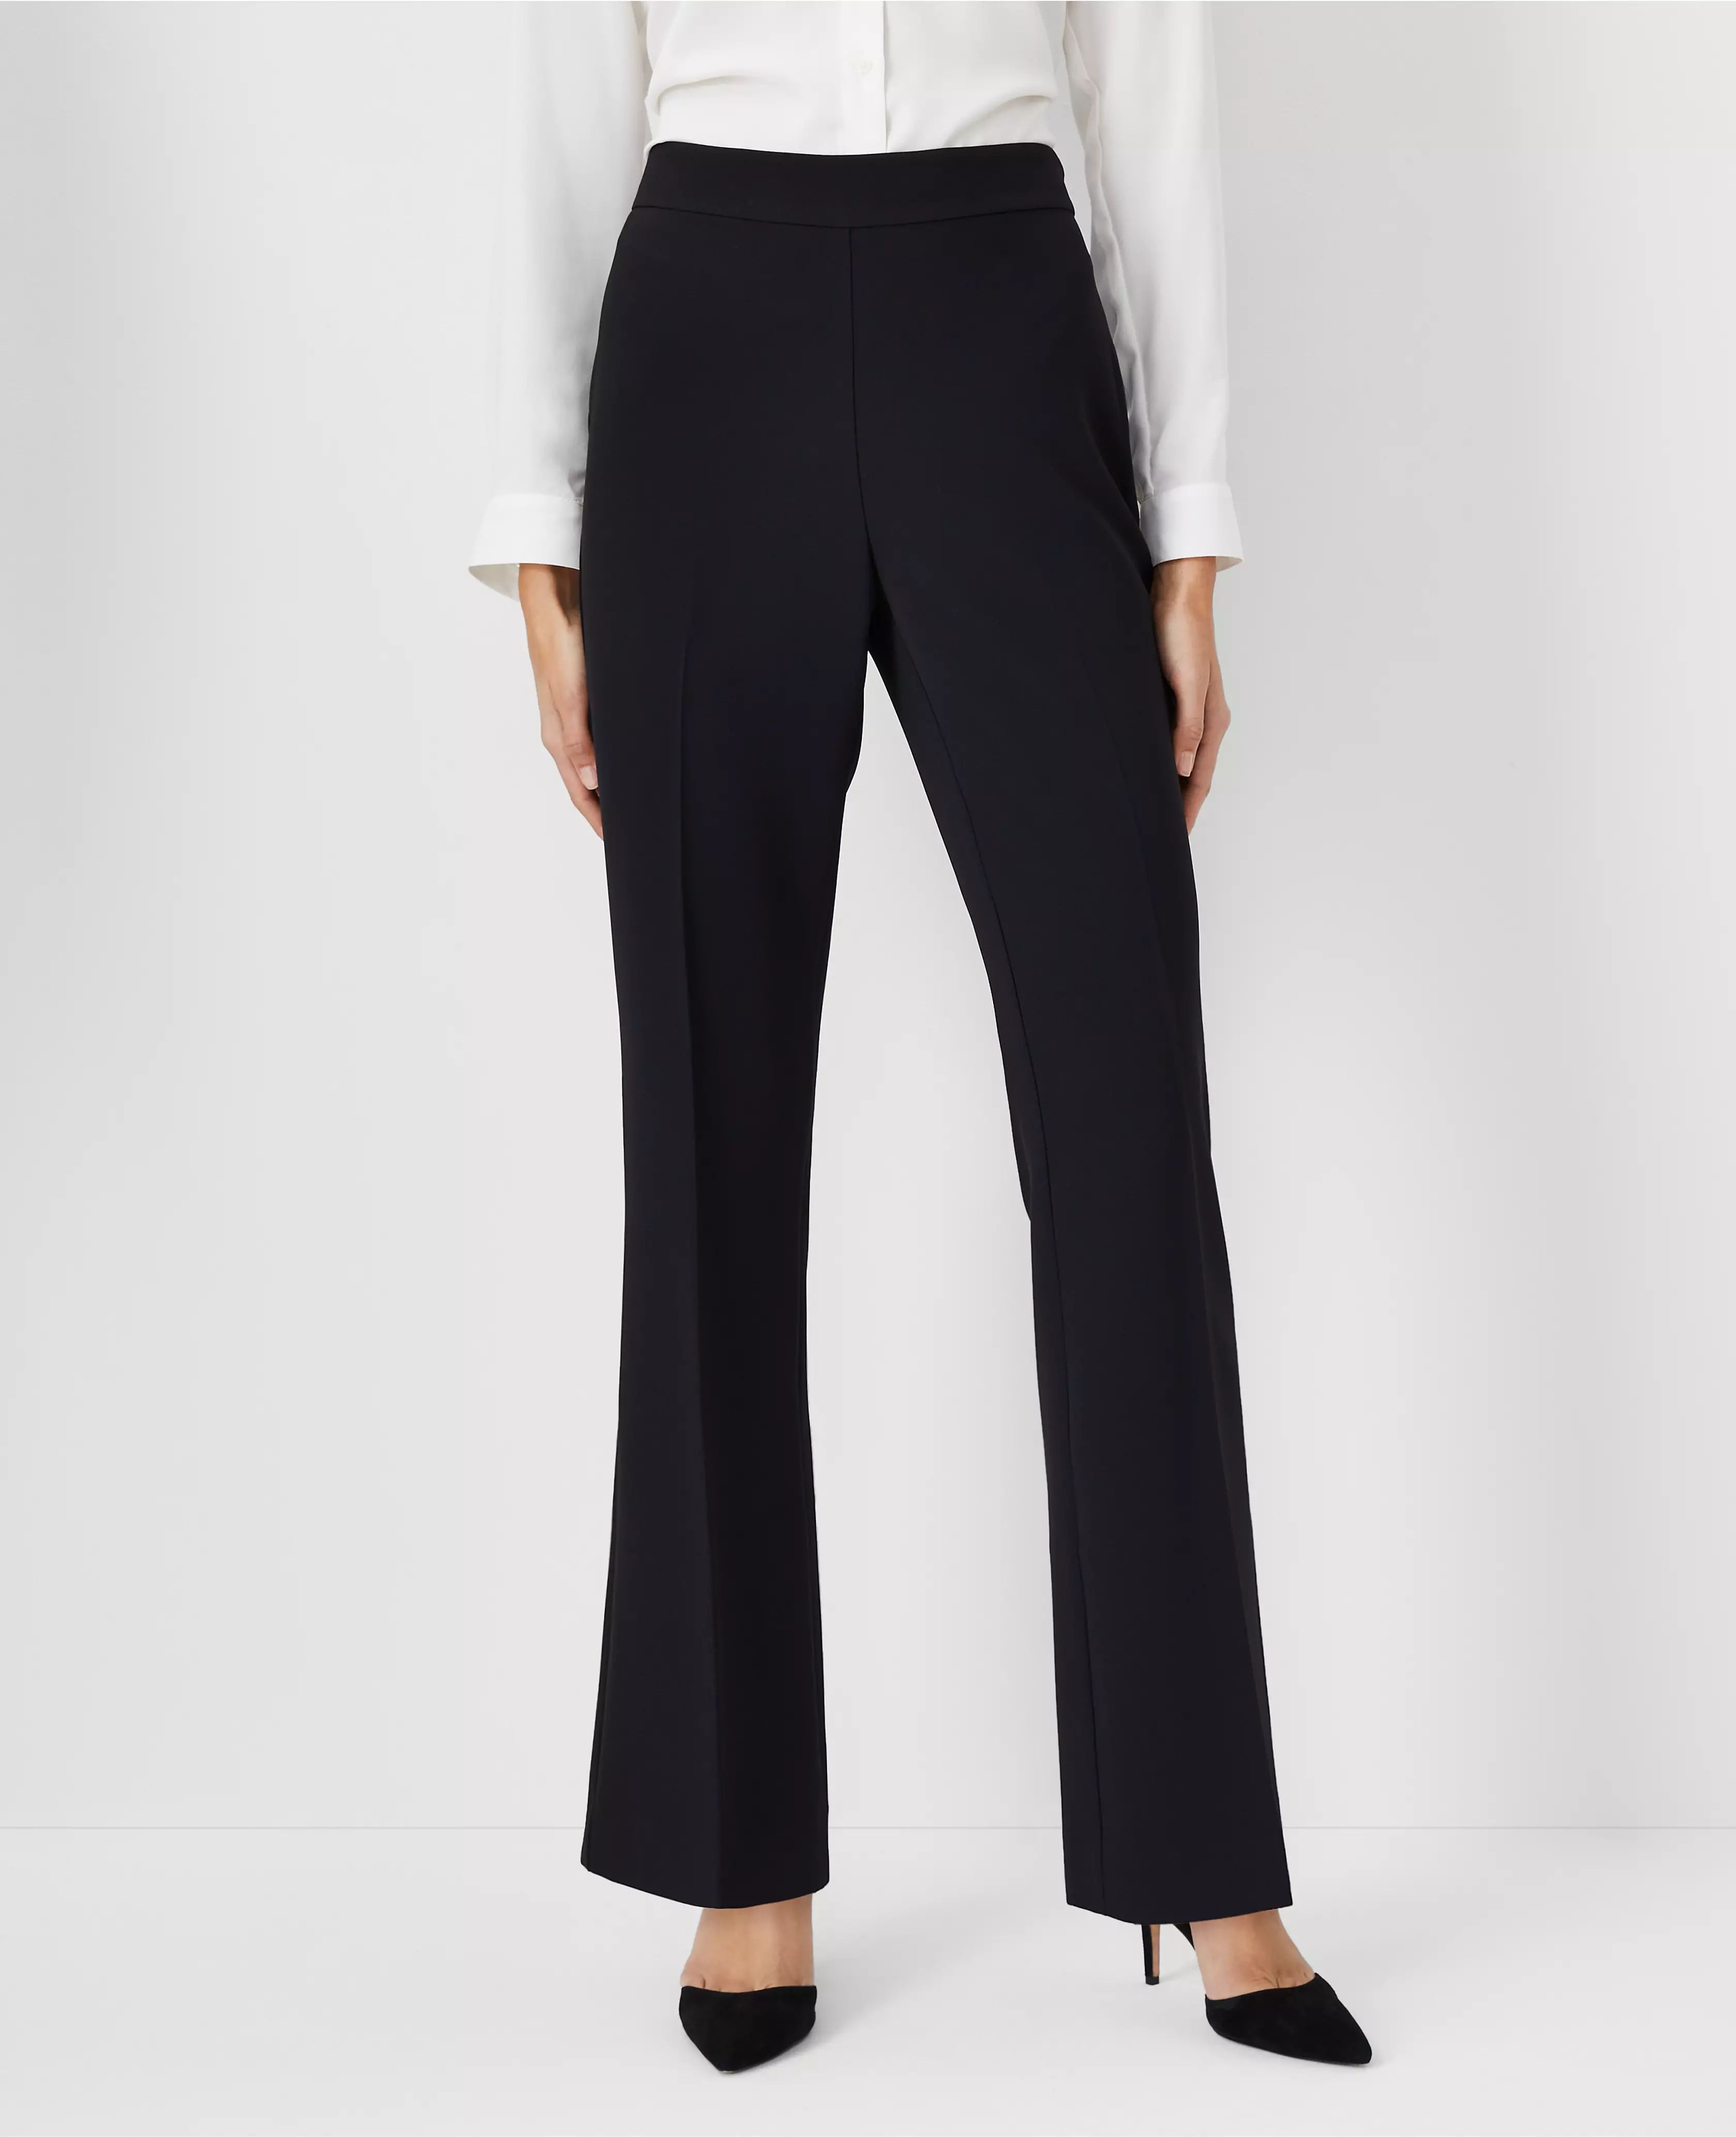 The Side Zip Trouser Pant in Fluid Crepe - Curvy Fit | Ann Taylor (US)